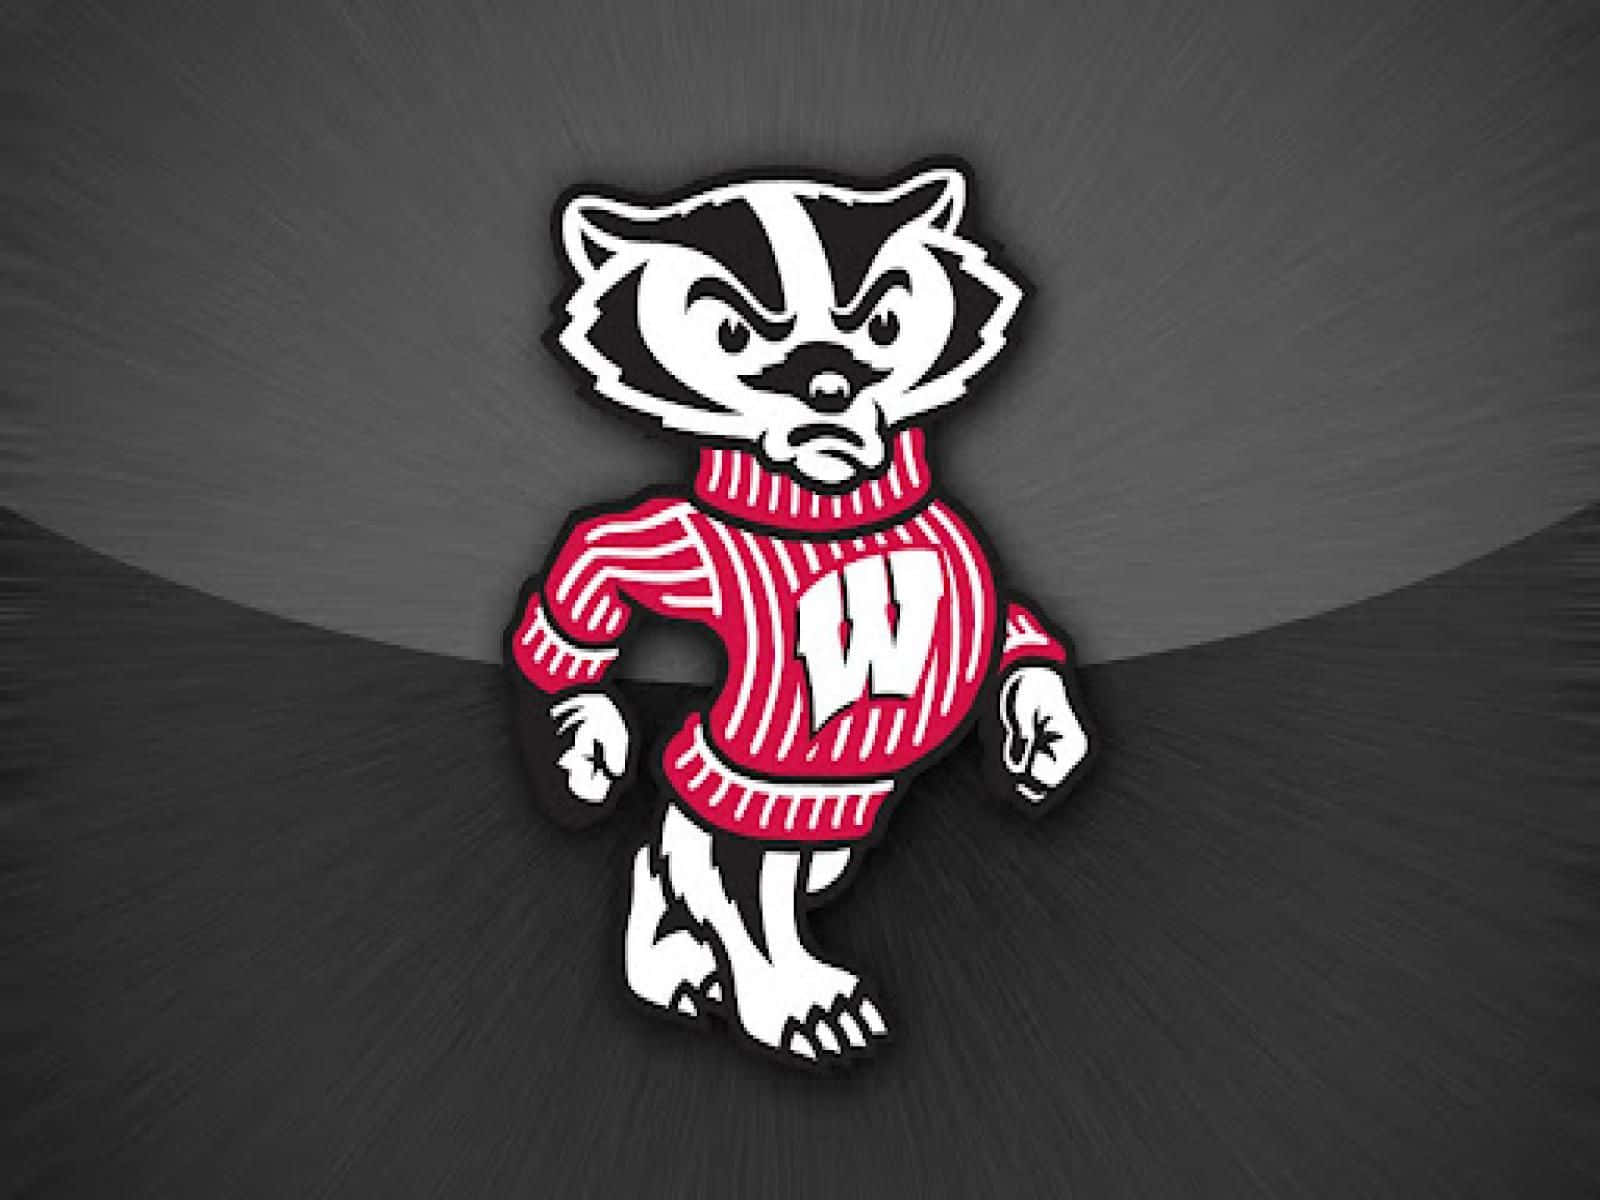 Caption: Wisconsin Badgers Logo on Striped Background Wallpaper